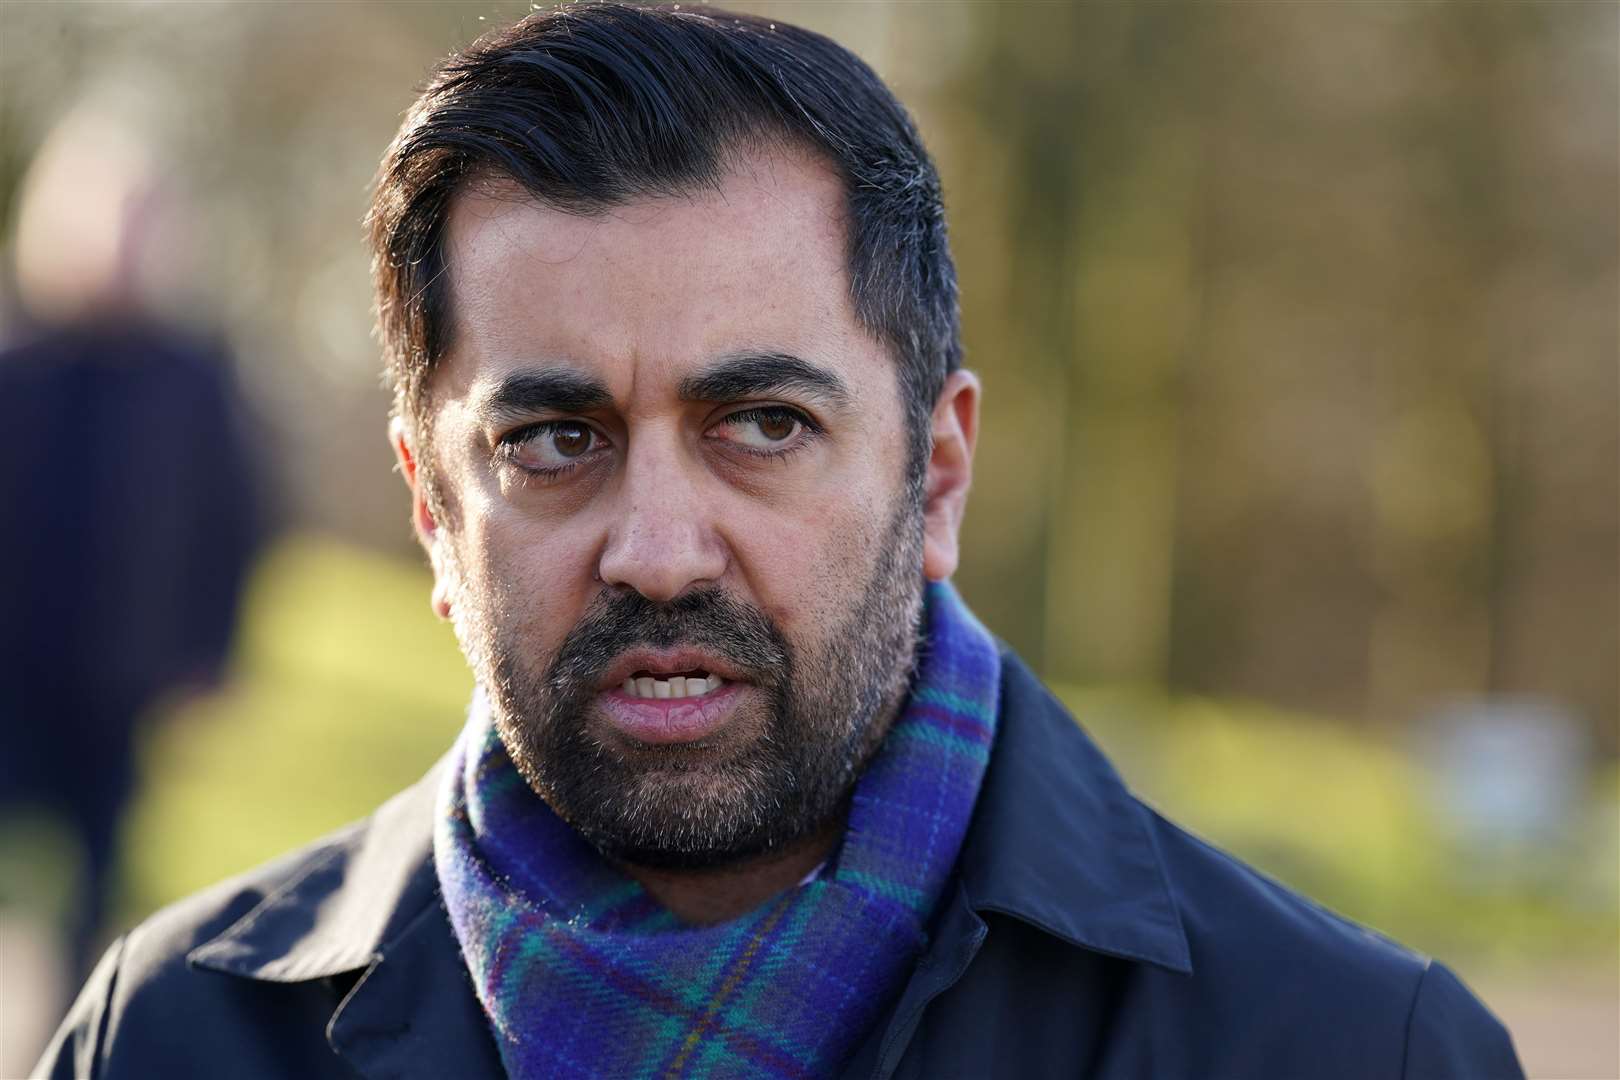 Humza Yousaf said the legislation is being enforced in a ‘proportionate way’ (Andrew Milligan/PA)